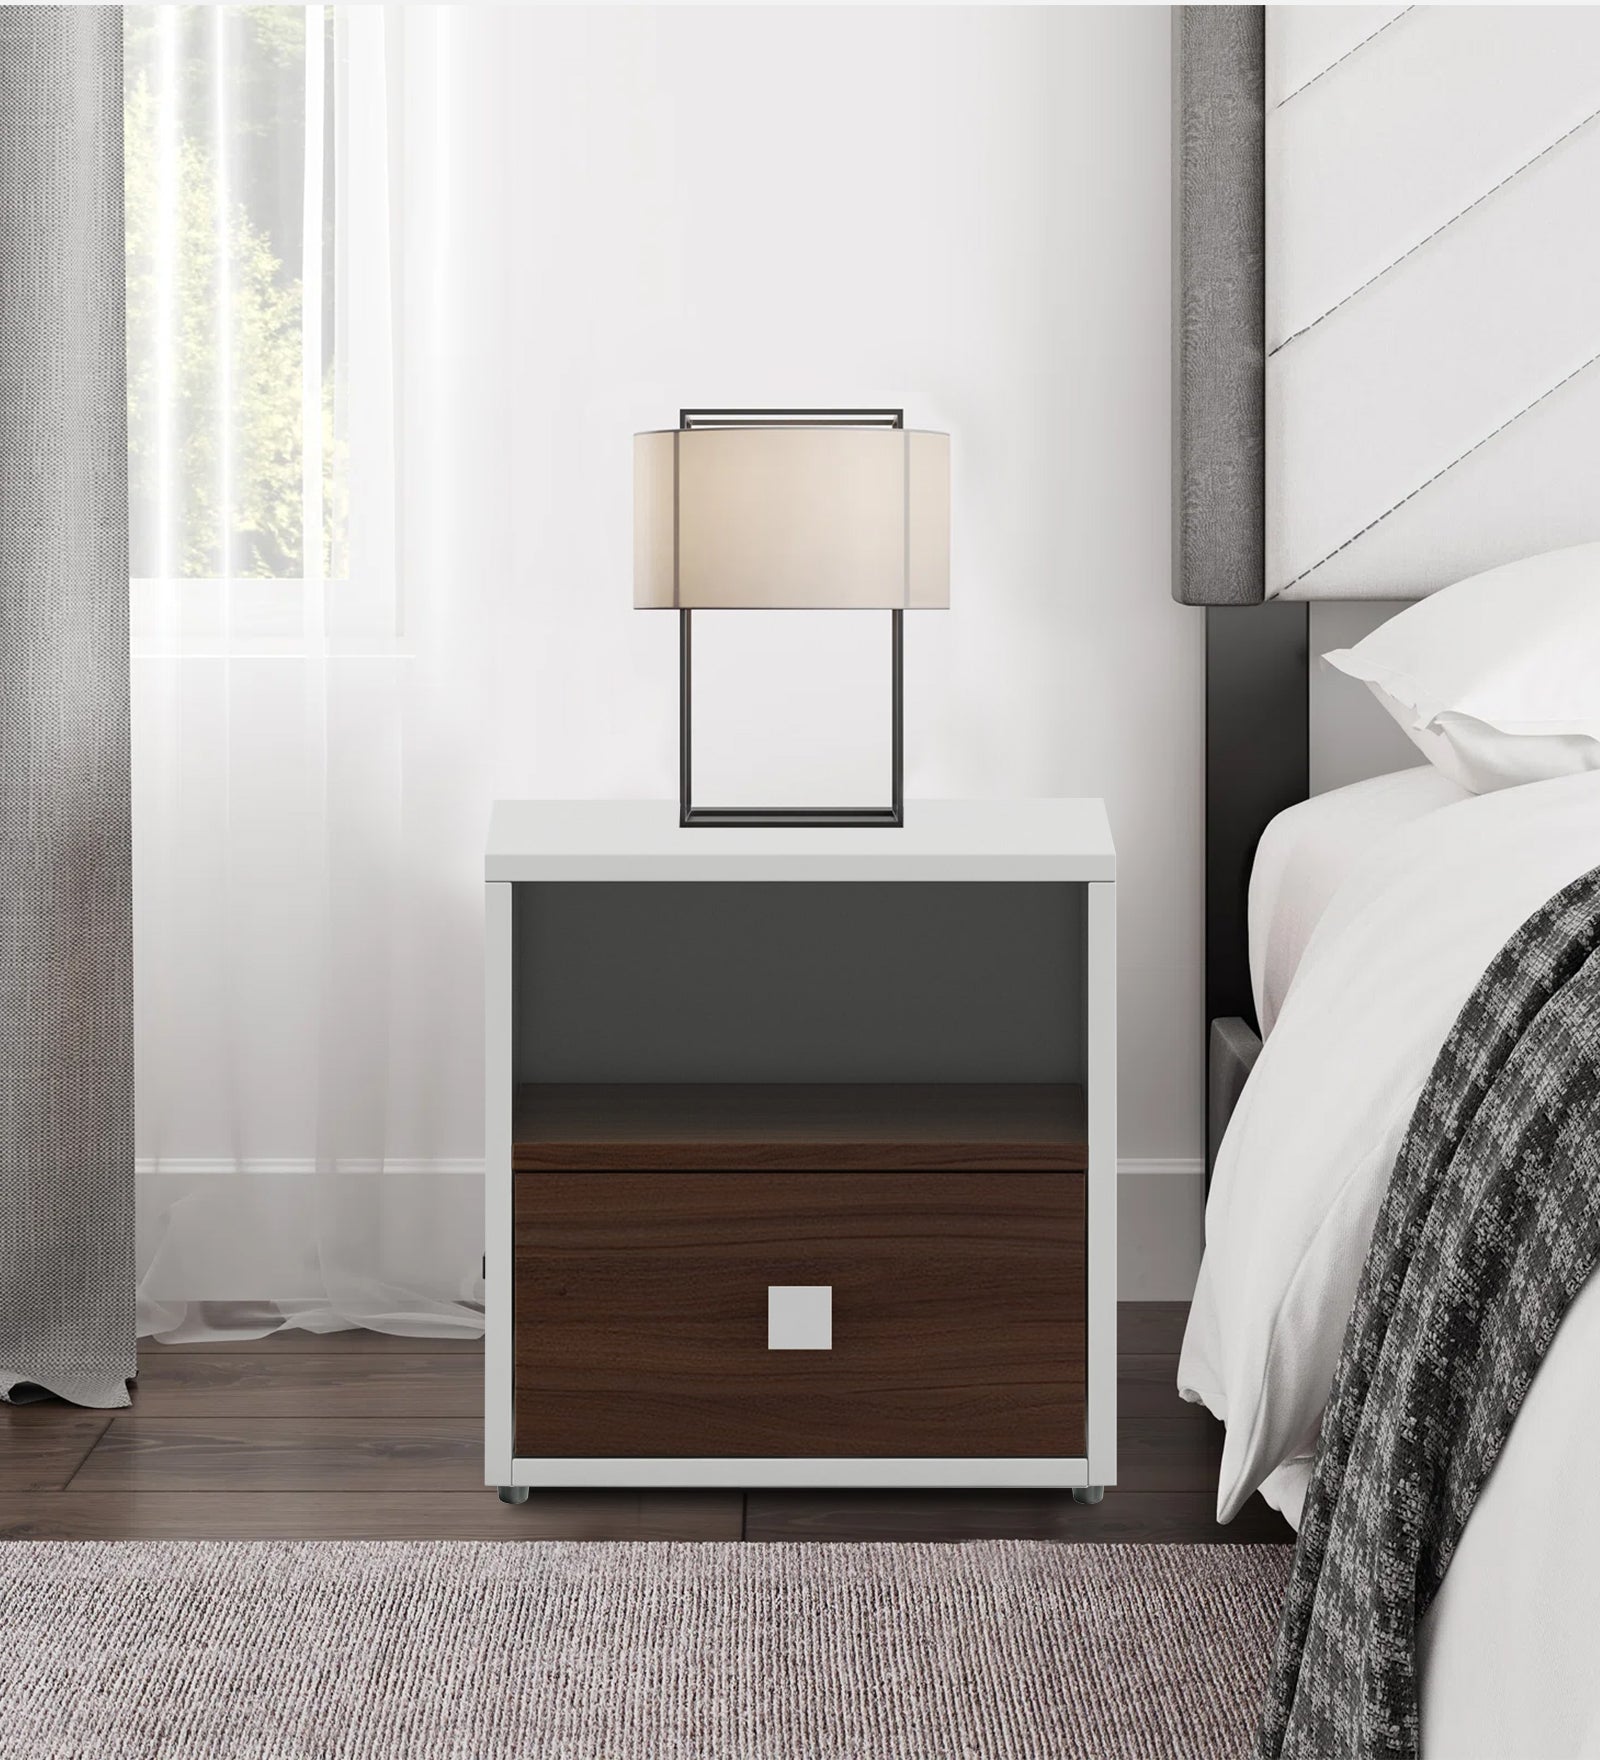 Cave Bedside Table With Drawer in Dark Walnut & Frosty White Finish